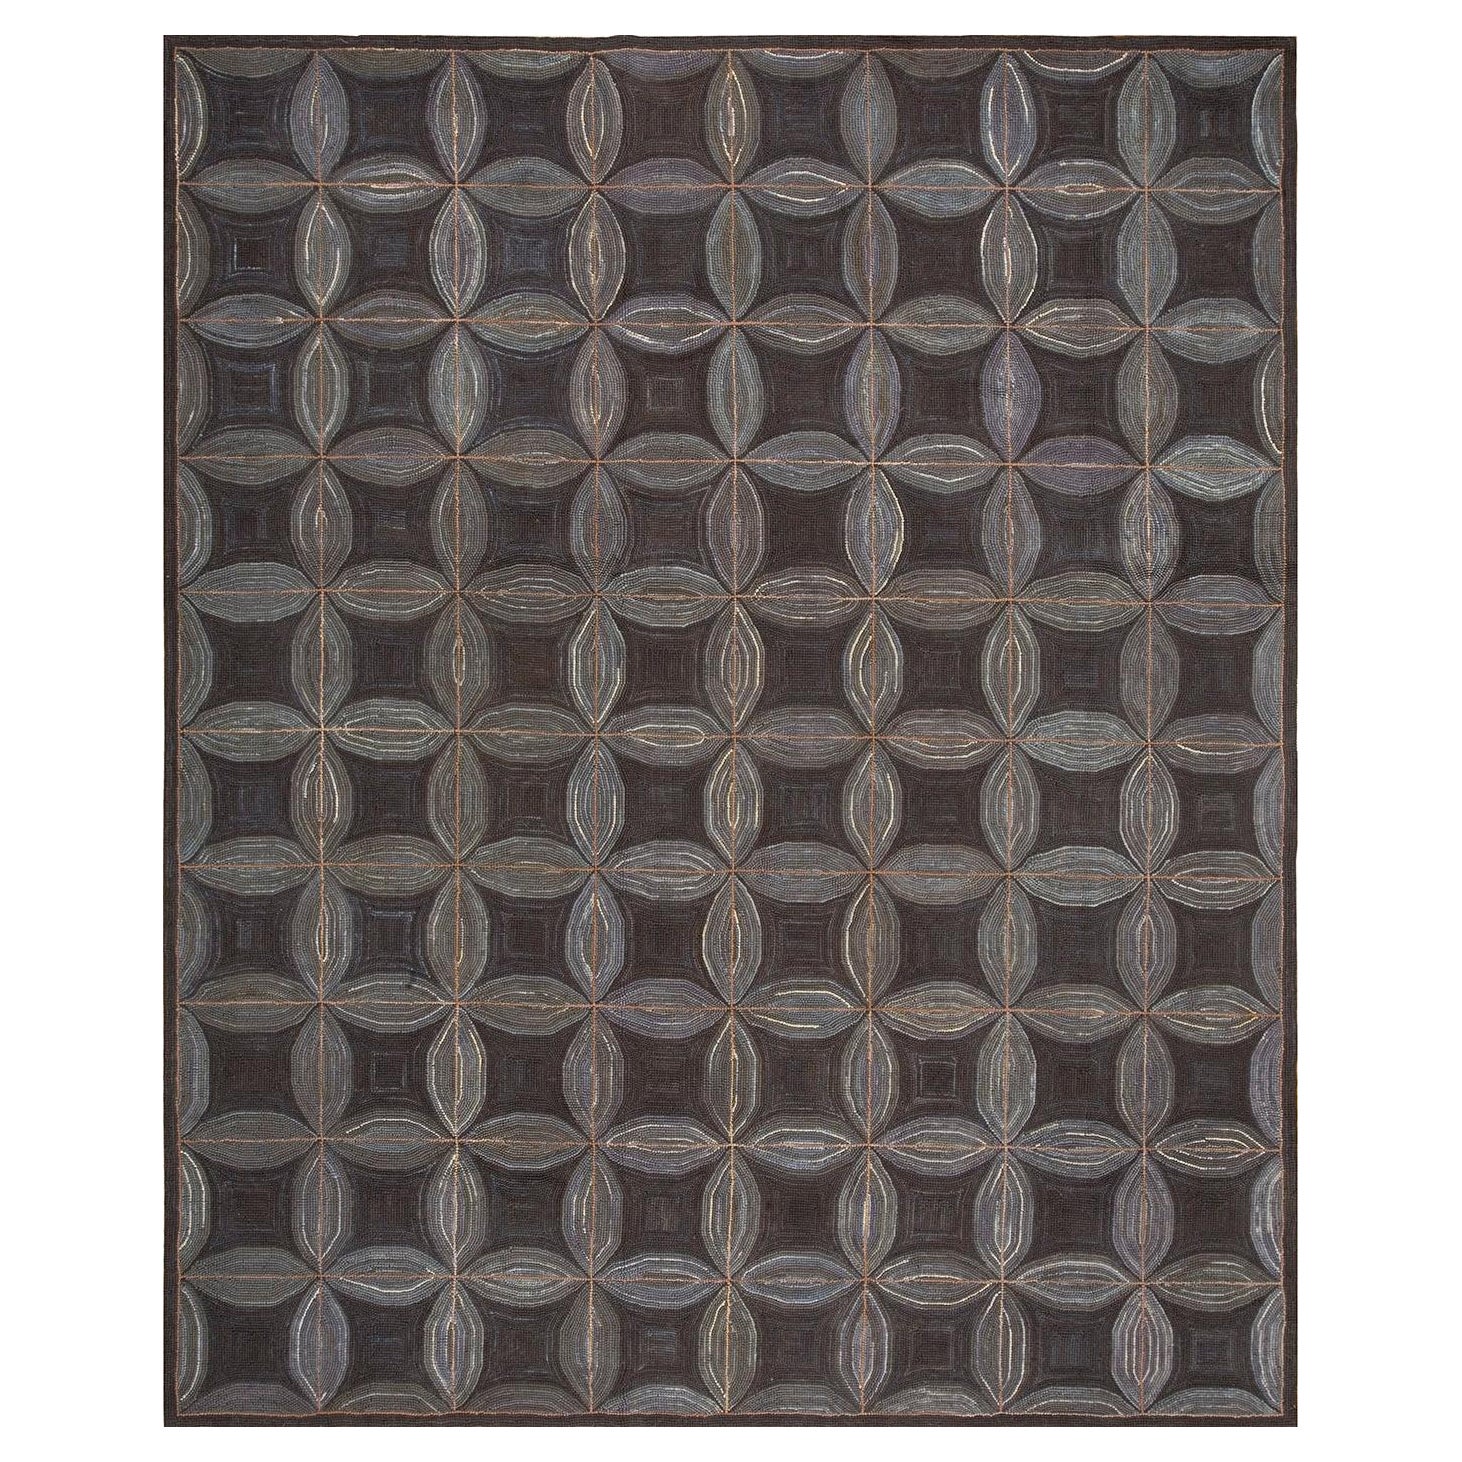 Contemporary American Hooked Rug (6' x 9' - 182 x 274) For Sale